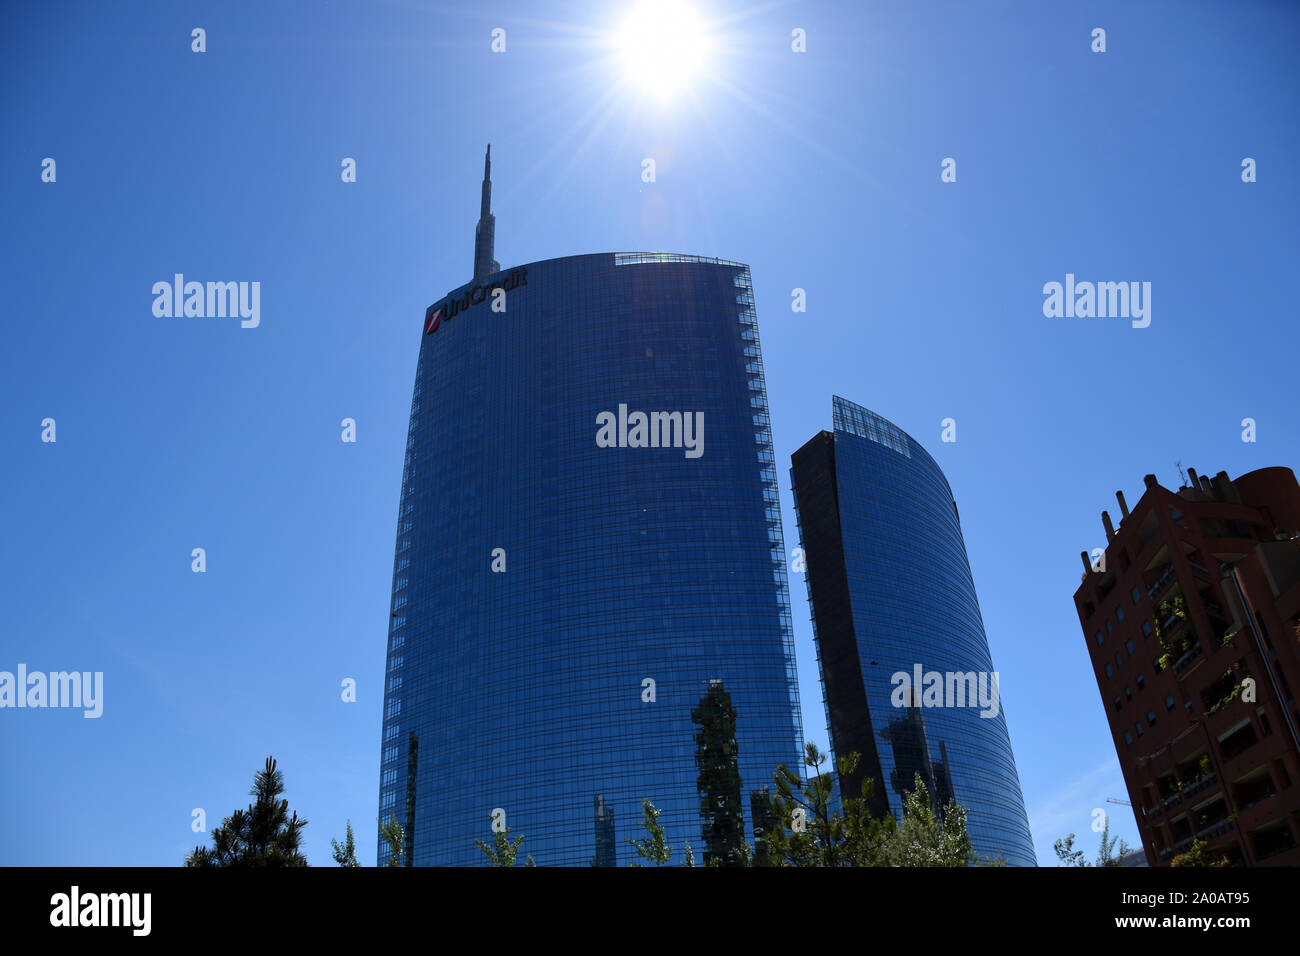 View of the stunning, amazing, full glass UniCredit Tower skyscraper from Gae Aulenti Park, it’s the tallest building (231 meters) in Italy designed b Stock Photo